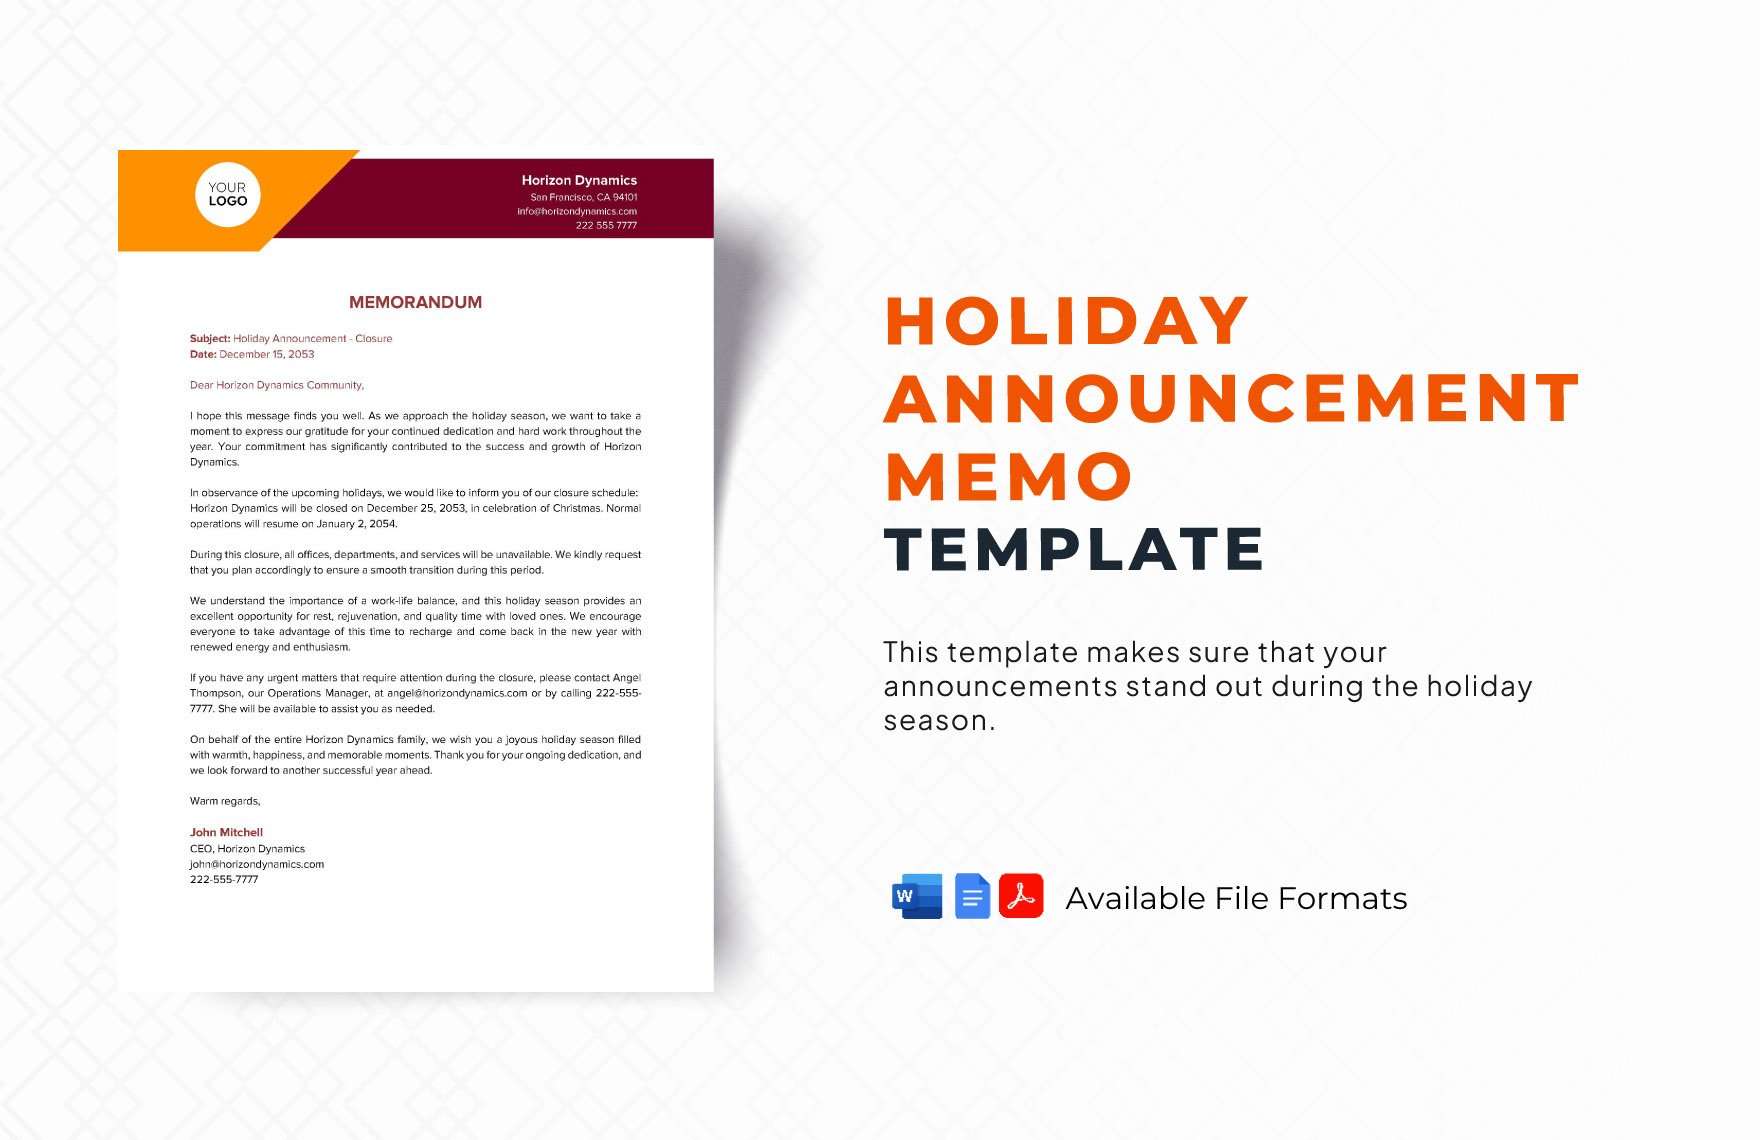 Free Holiday Announcement Memo Template in Word, Google Docs, PDF